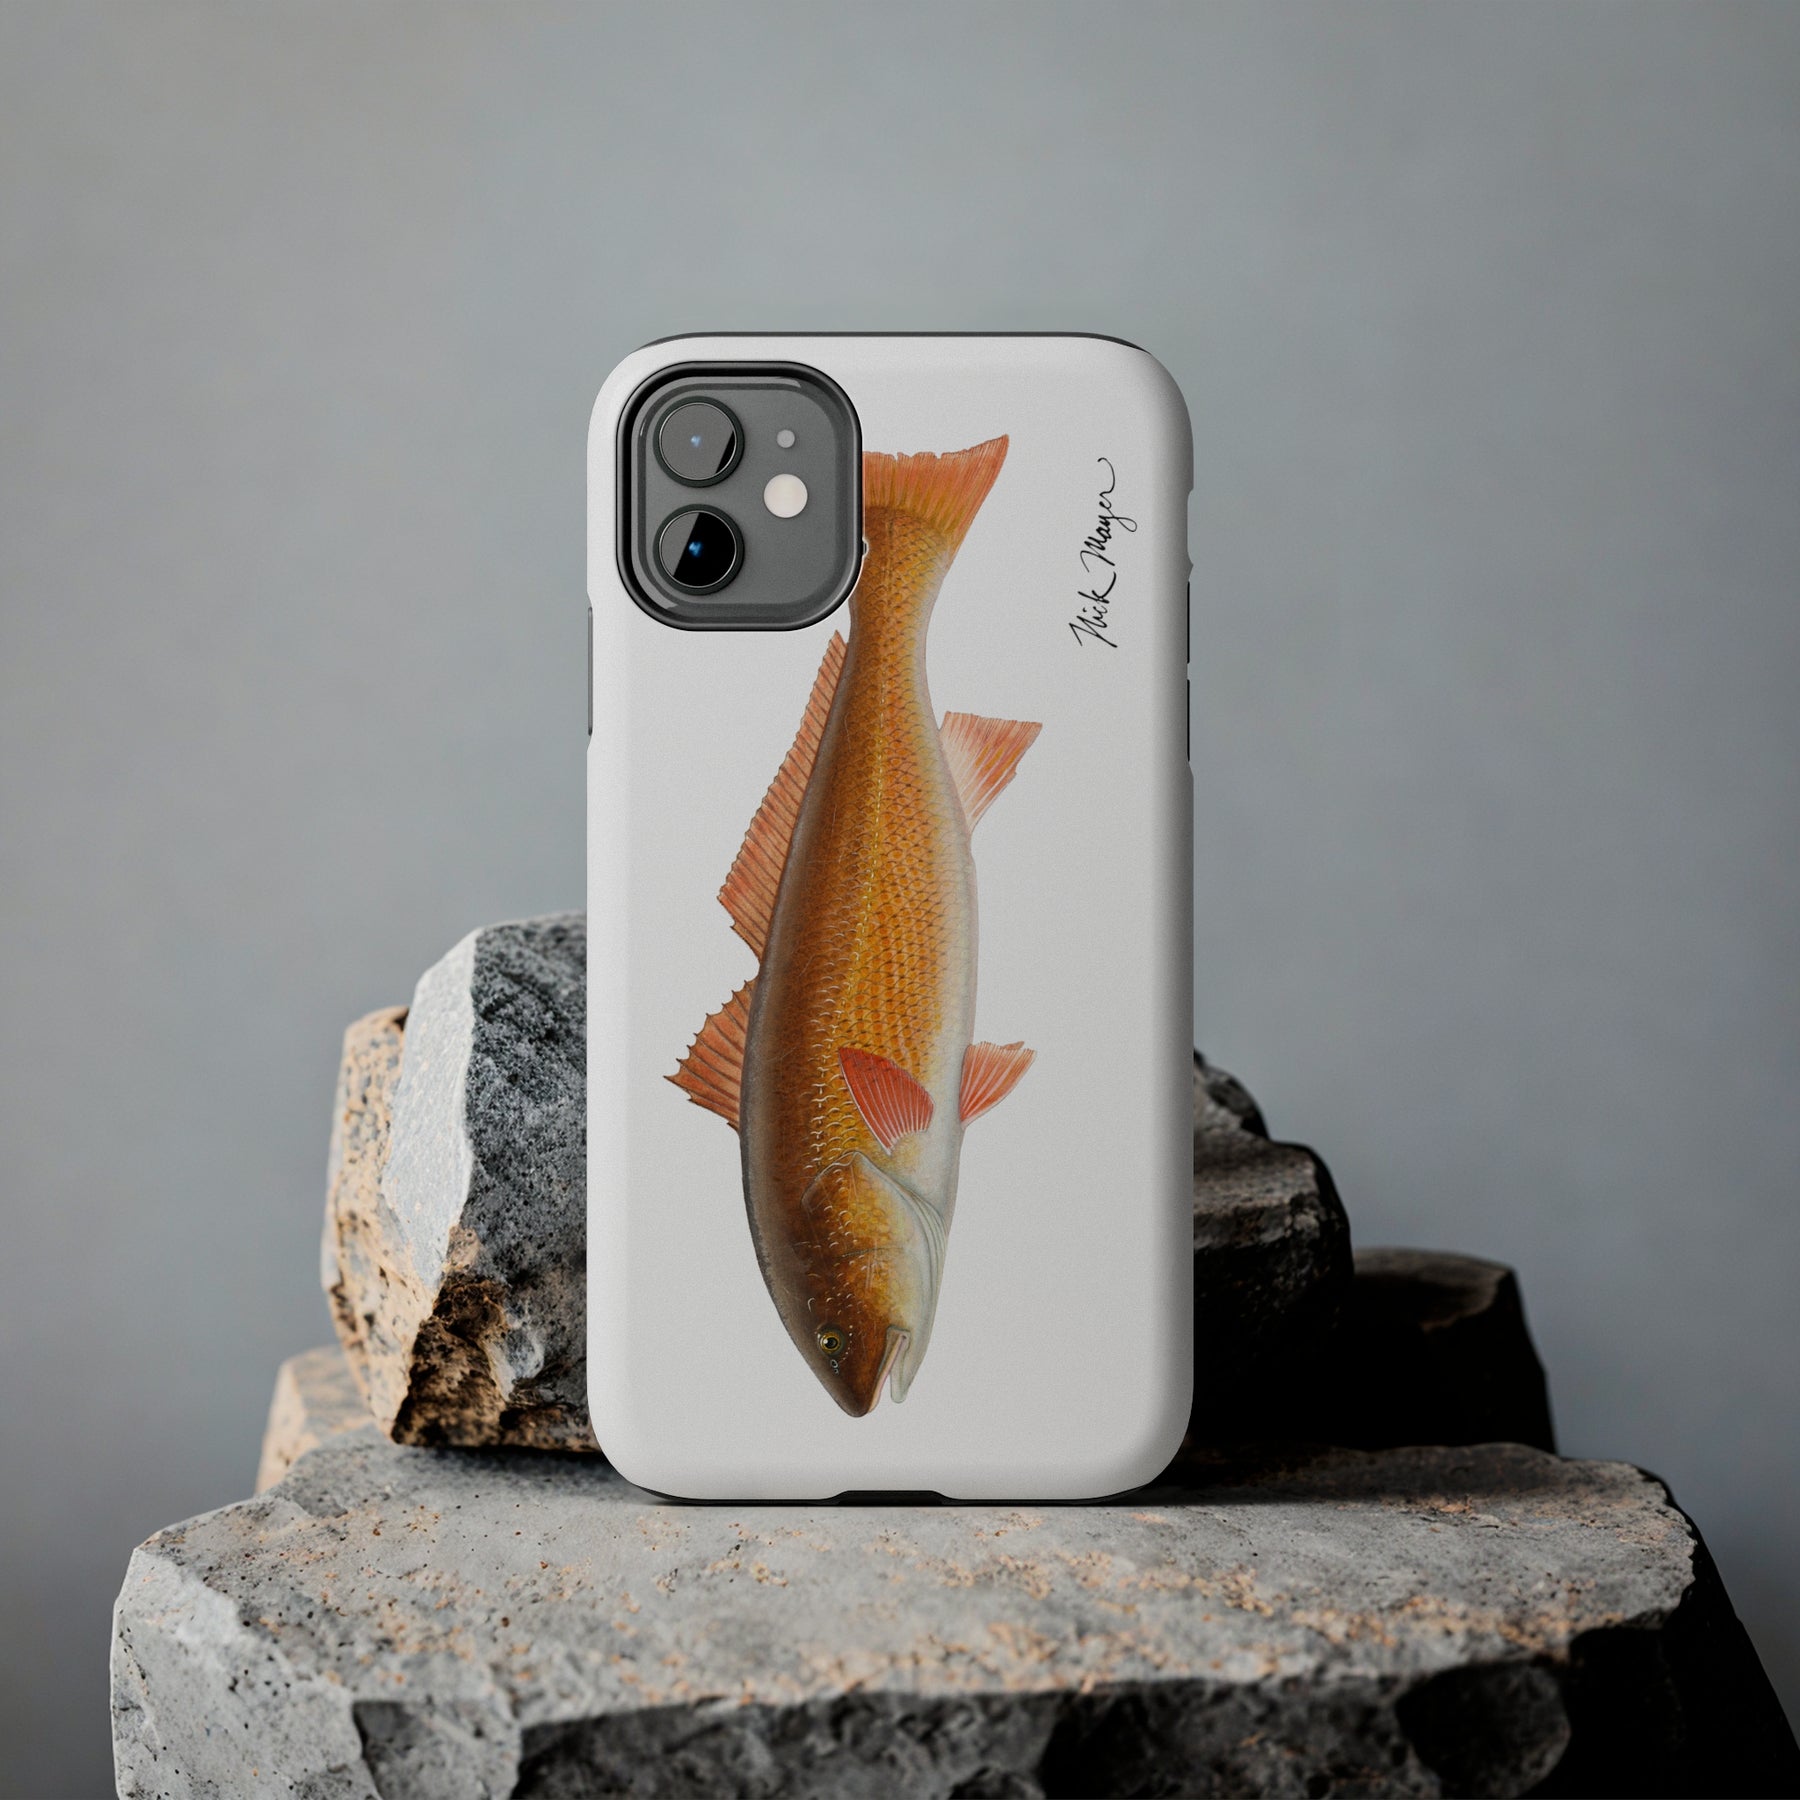 Durable phone protection with our Redfish Phone Case